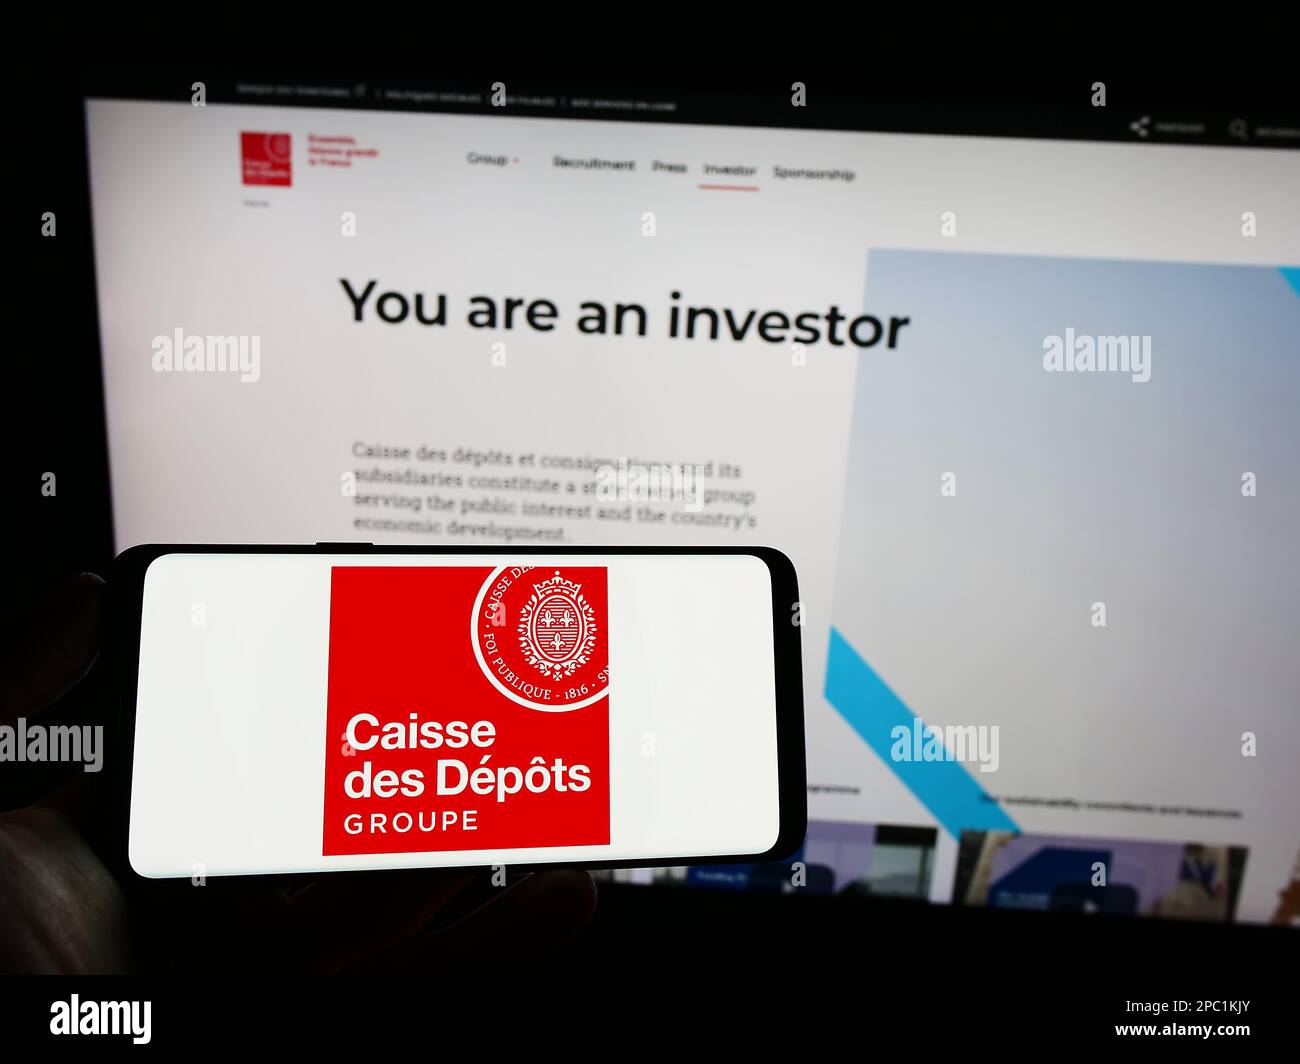 Person holding cellphone with logo of Caisse des Depots et Consignations (CDC) on screen in front of webpage. Focus on phone display. Stock Photo